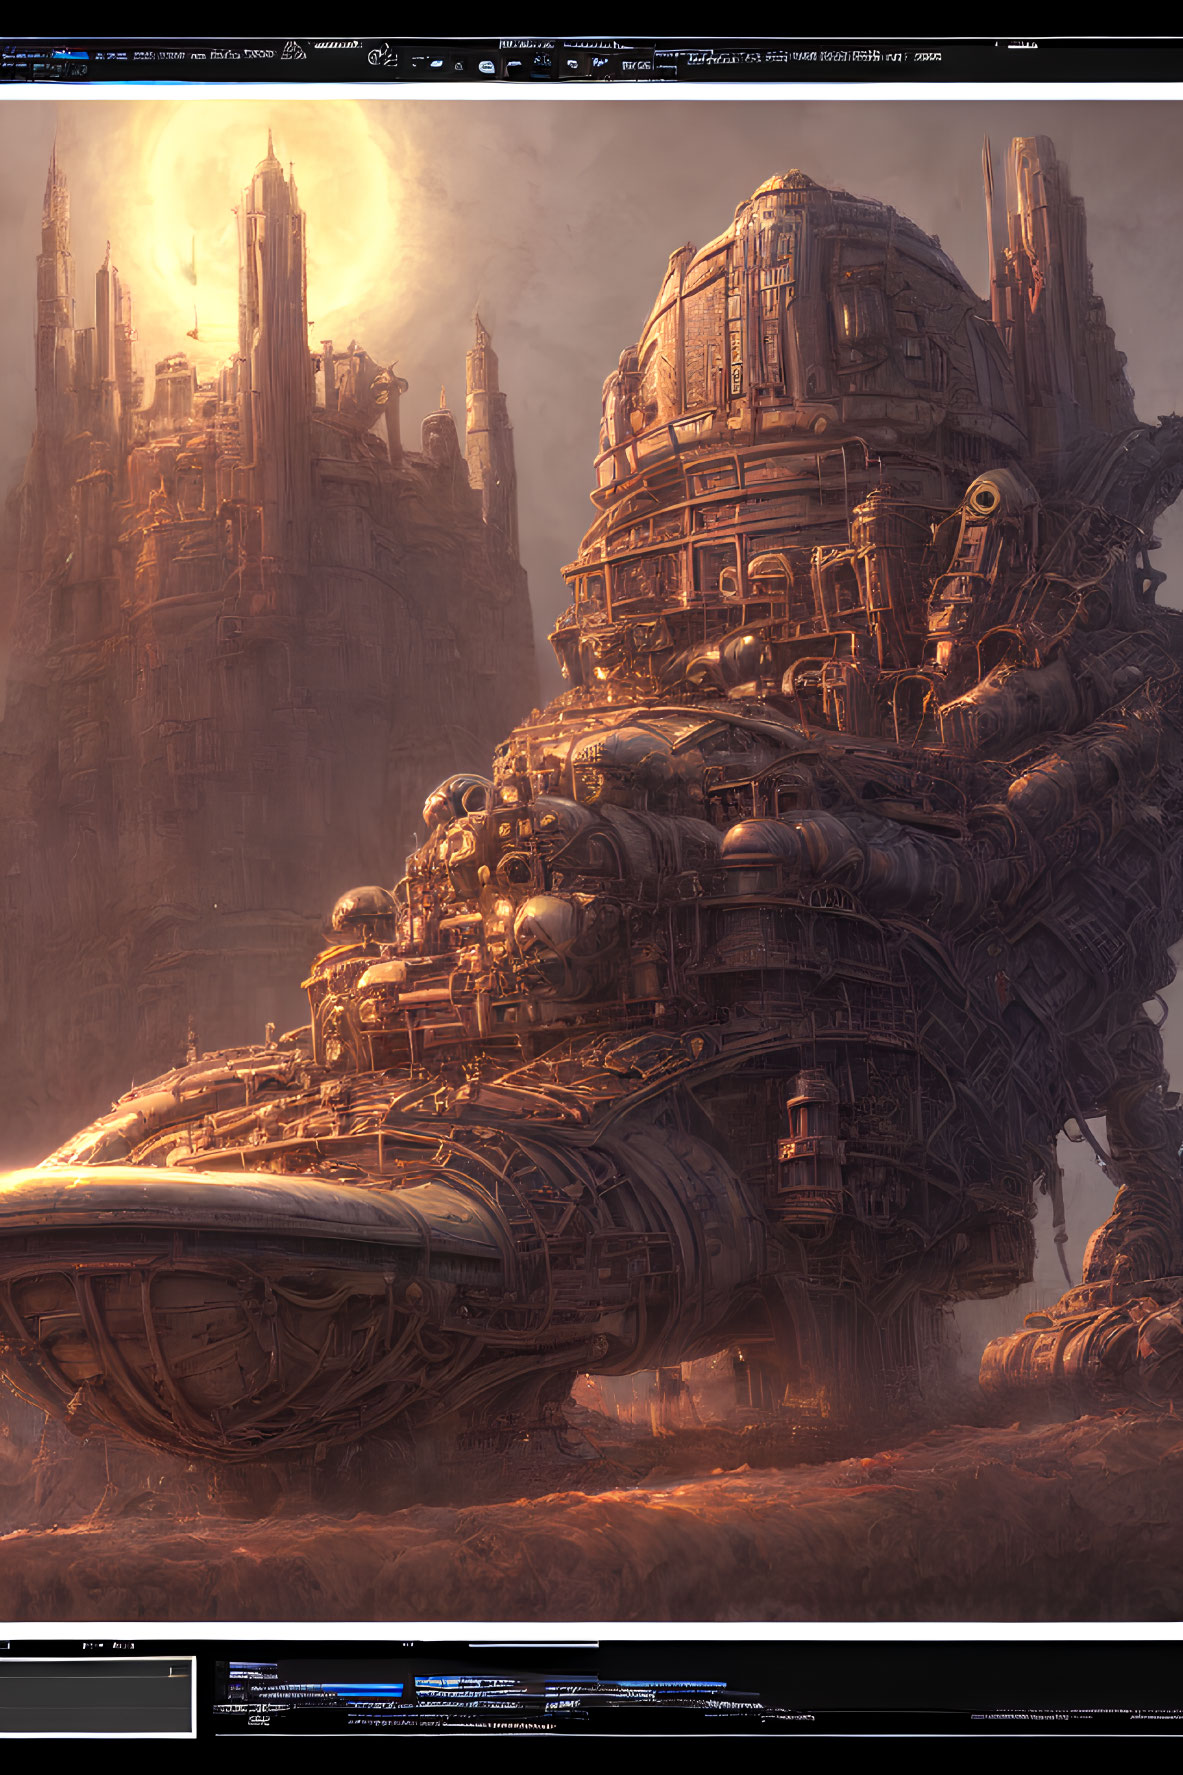 Mechanized city in desert landscape with intricate architecture at sunrise or sunset